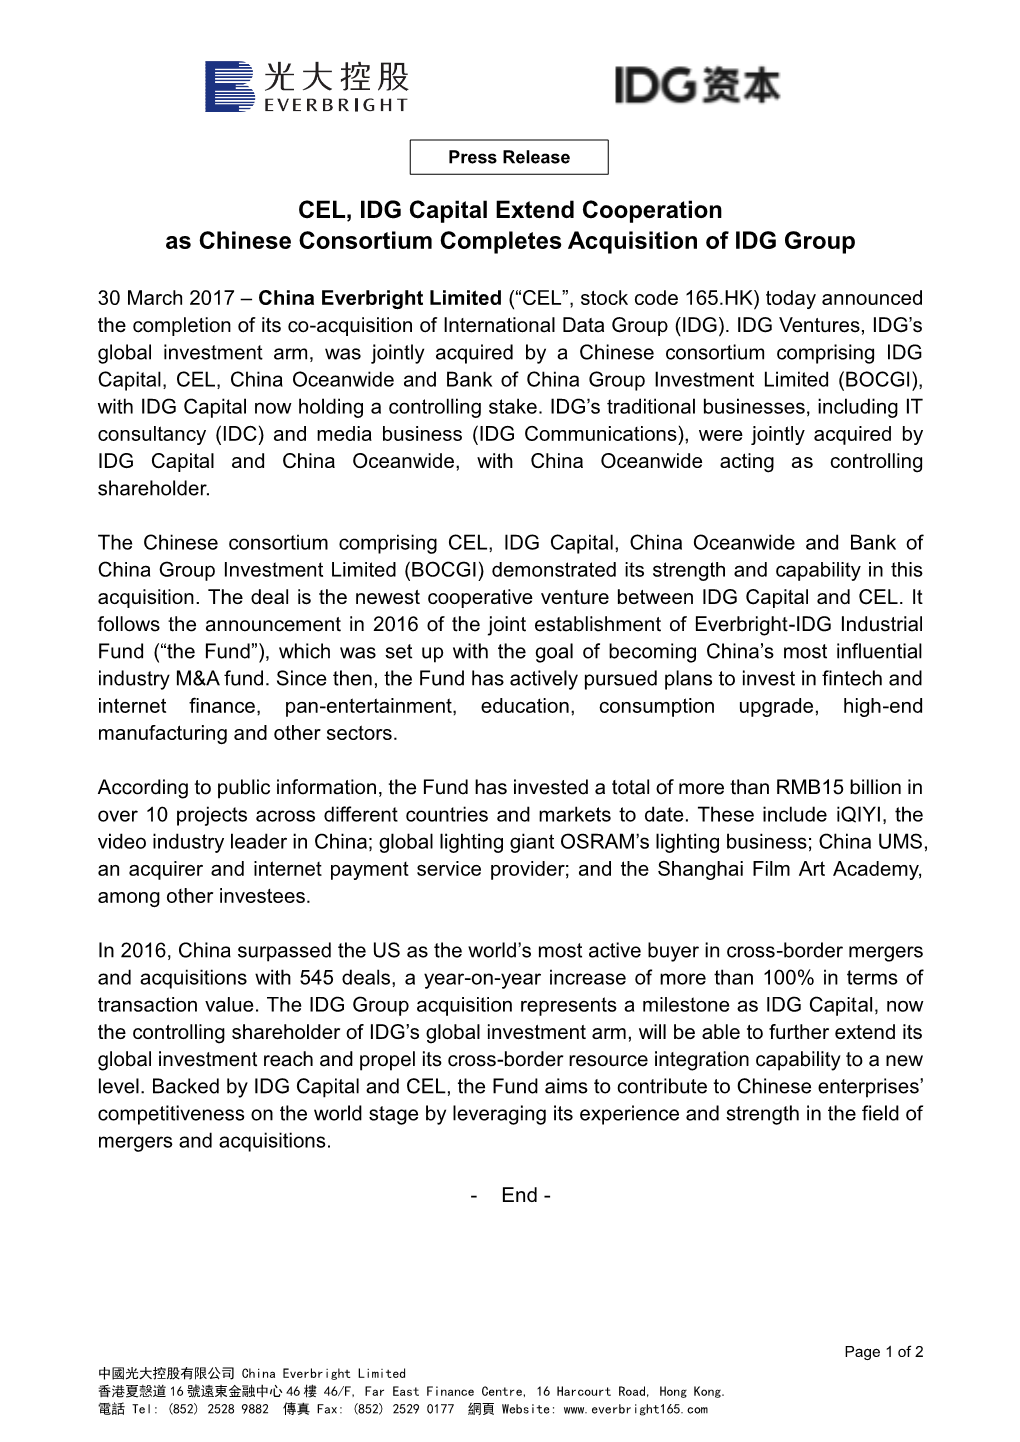 CEL, IDG Capital Extend Cooperation As Chinese Consortium Completes Acquisition of IDG Group